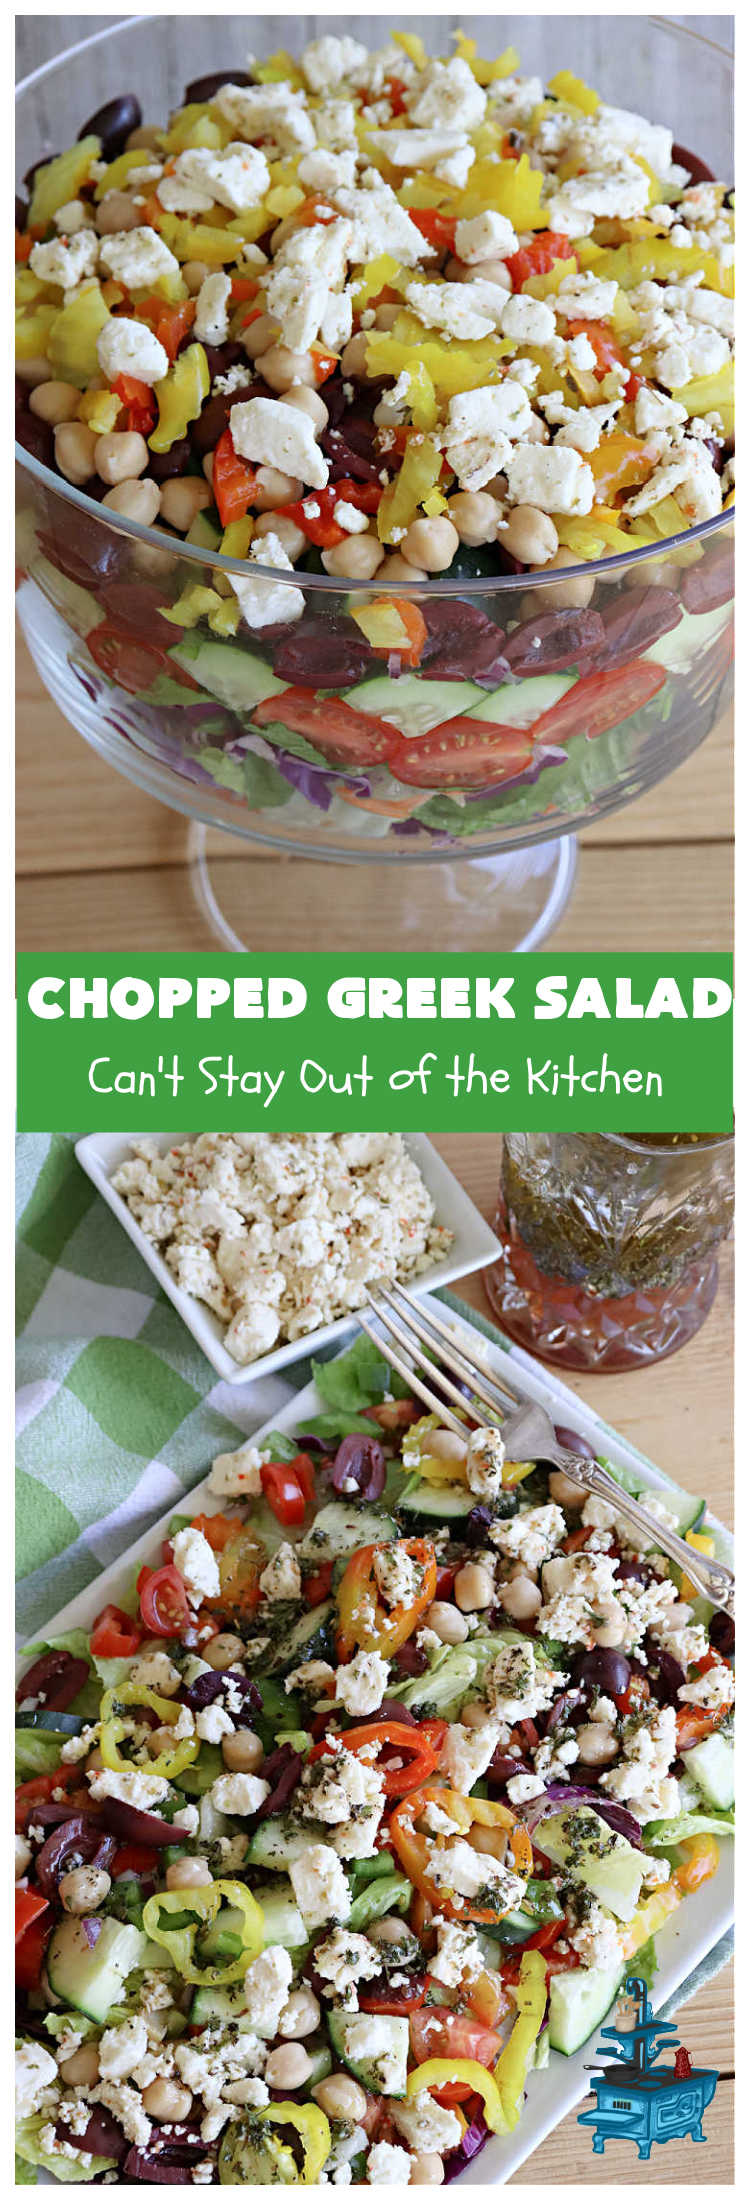 Chopped Greek Salad | Can't Stay Out of the Kitchen | this fantastic #GreekSalad #recipe includes #FetaCheese, #KalamataOlives, #MildPepperRings, #chickpeas, #tomatoes & #cucumber in a delicious & easy homemade #GreekSaladDressing. Fantastic for company or #holiday dinners. #GlutenFree #salad #ChoppedGreekSalad 